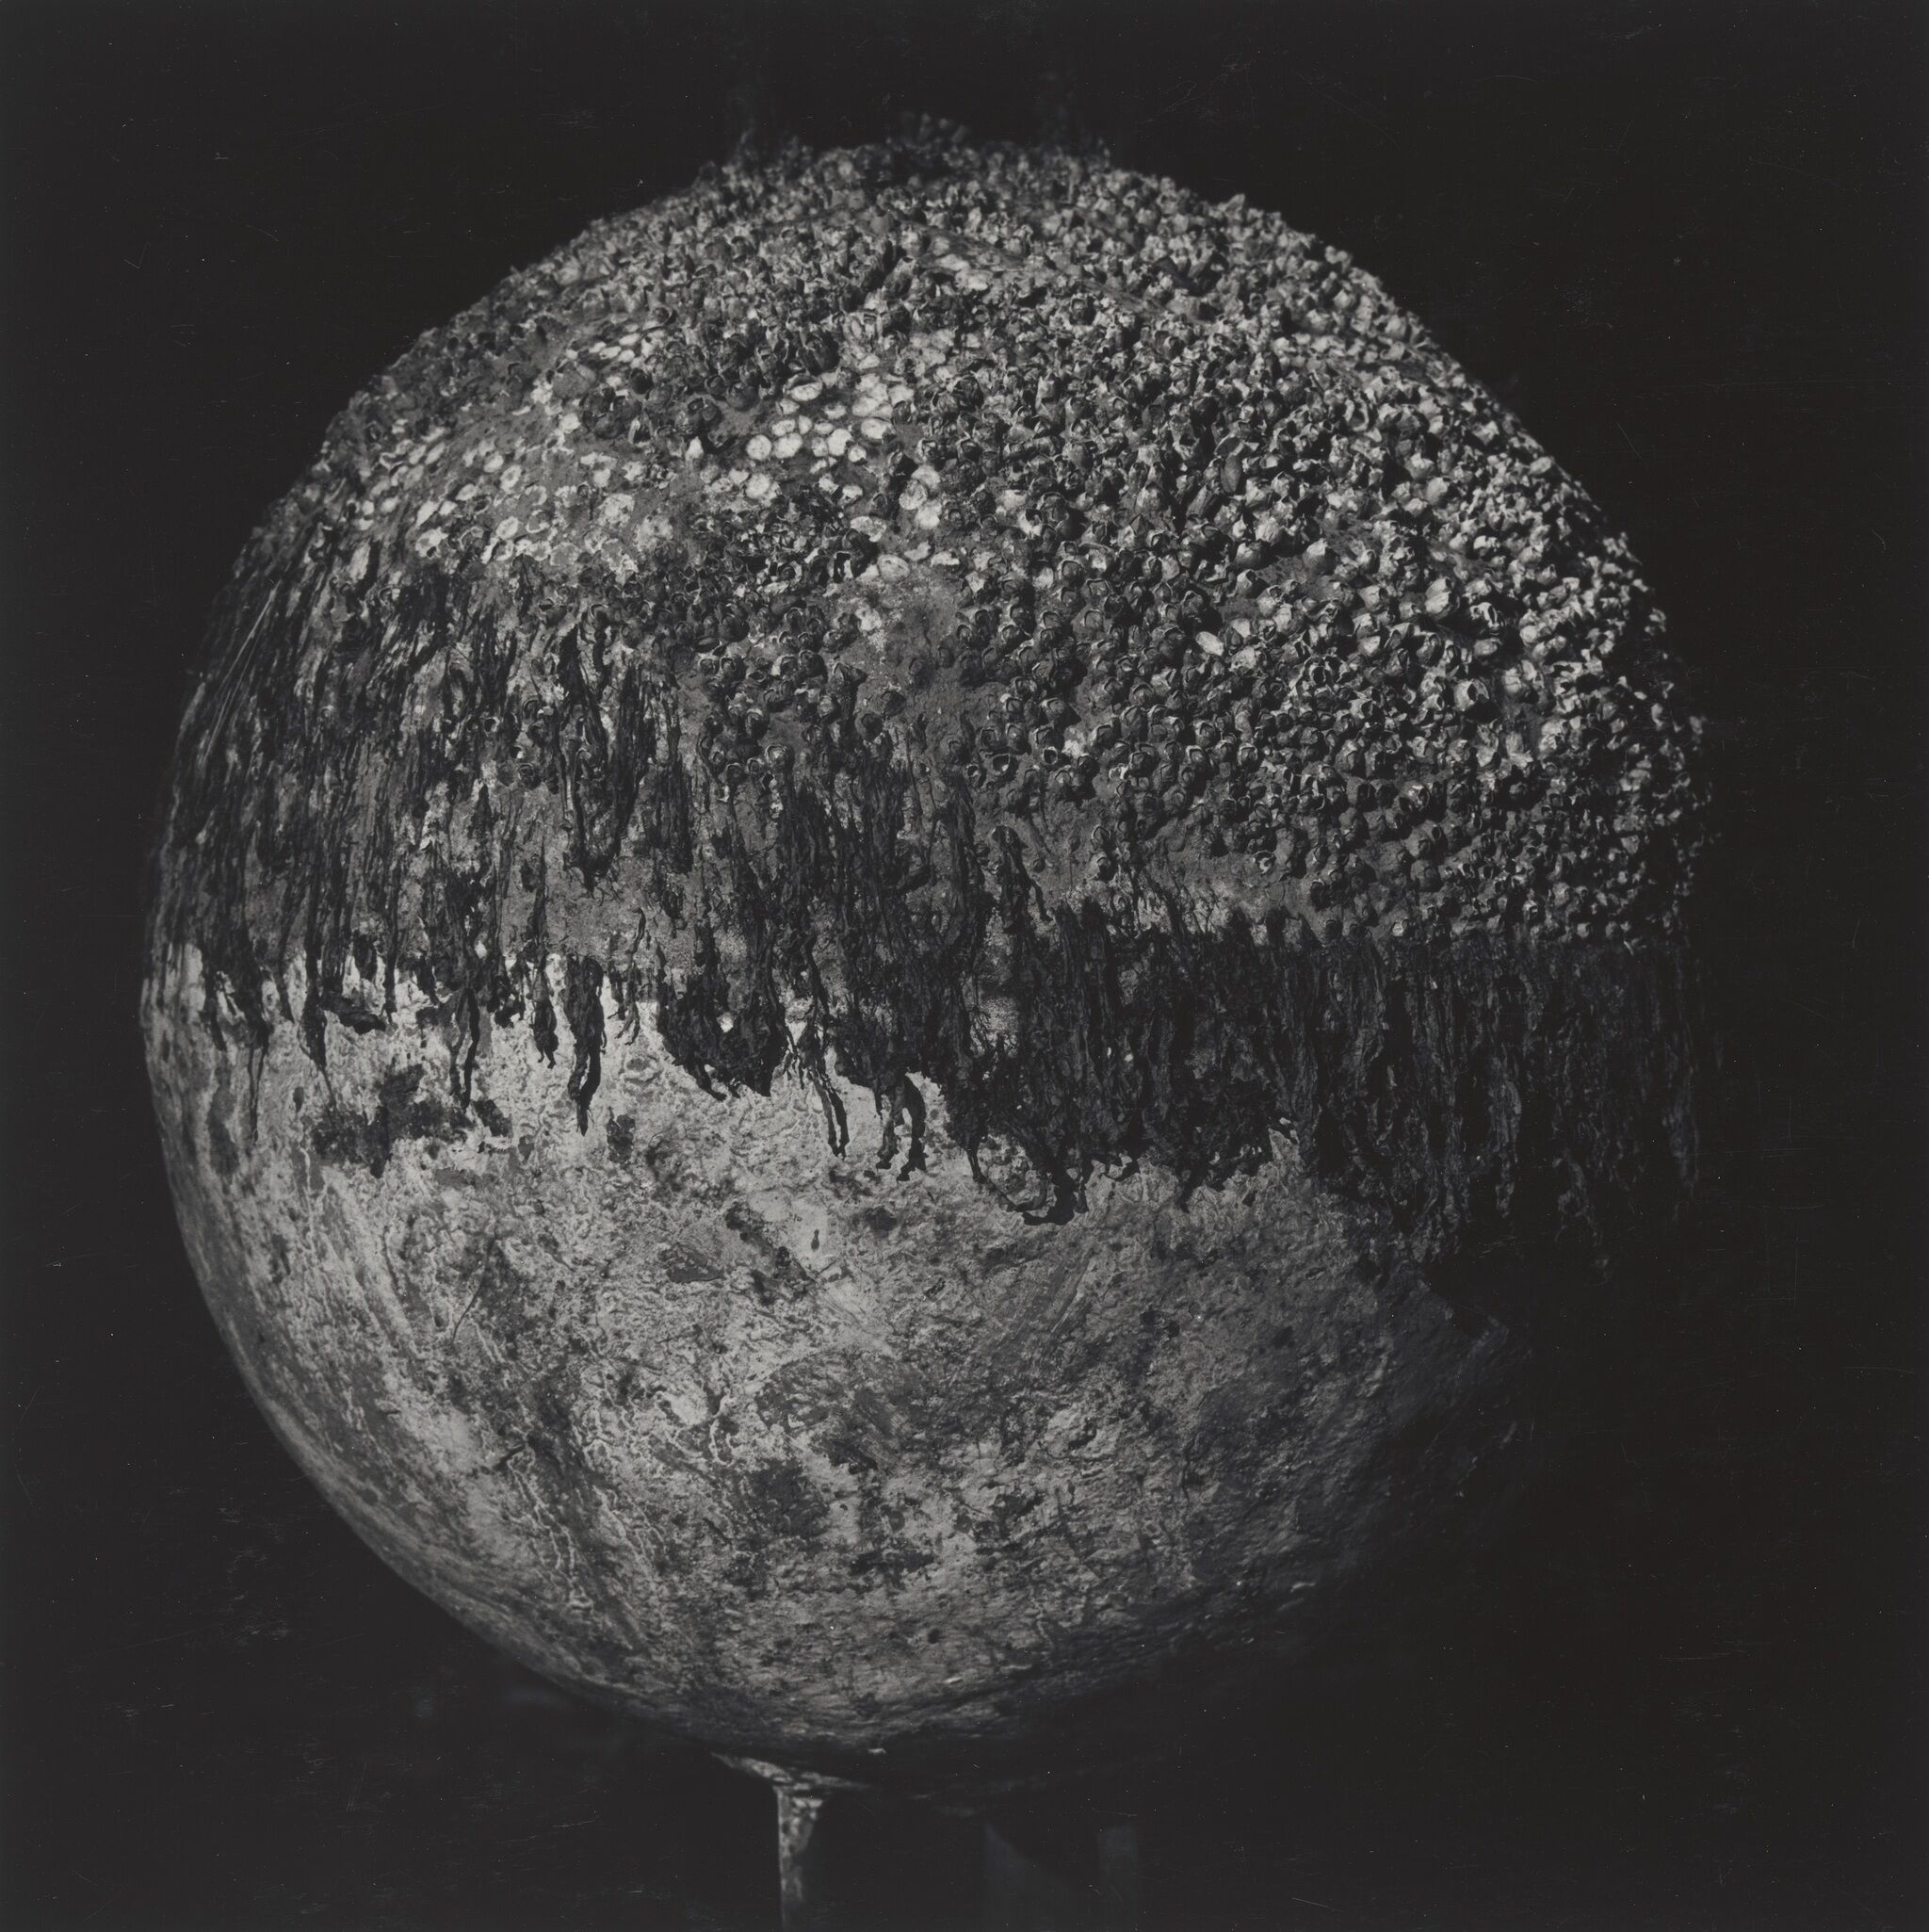 A sphere with varying textures on its surface.